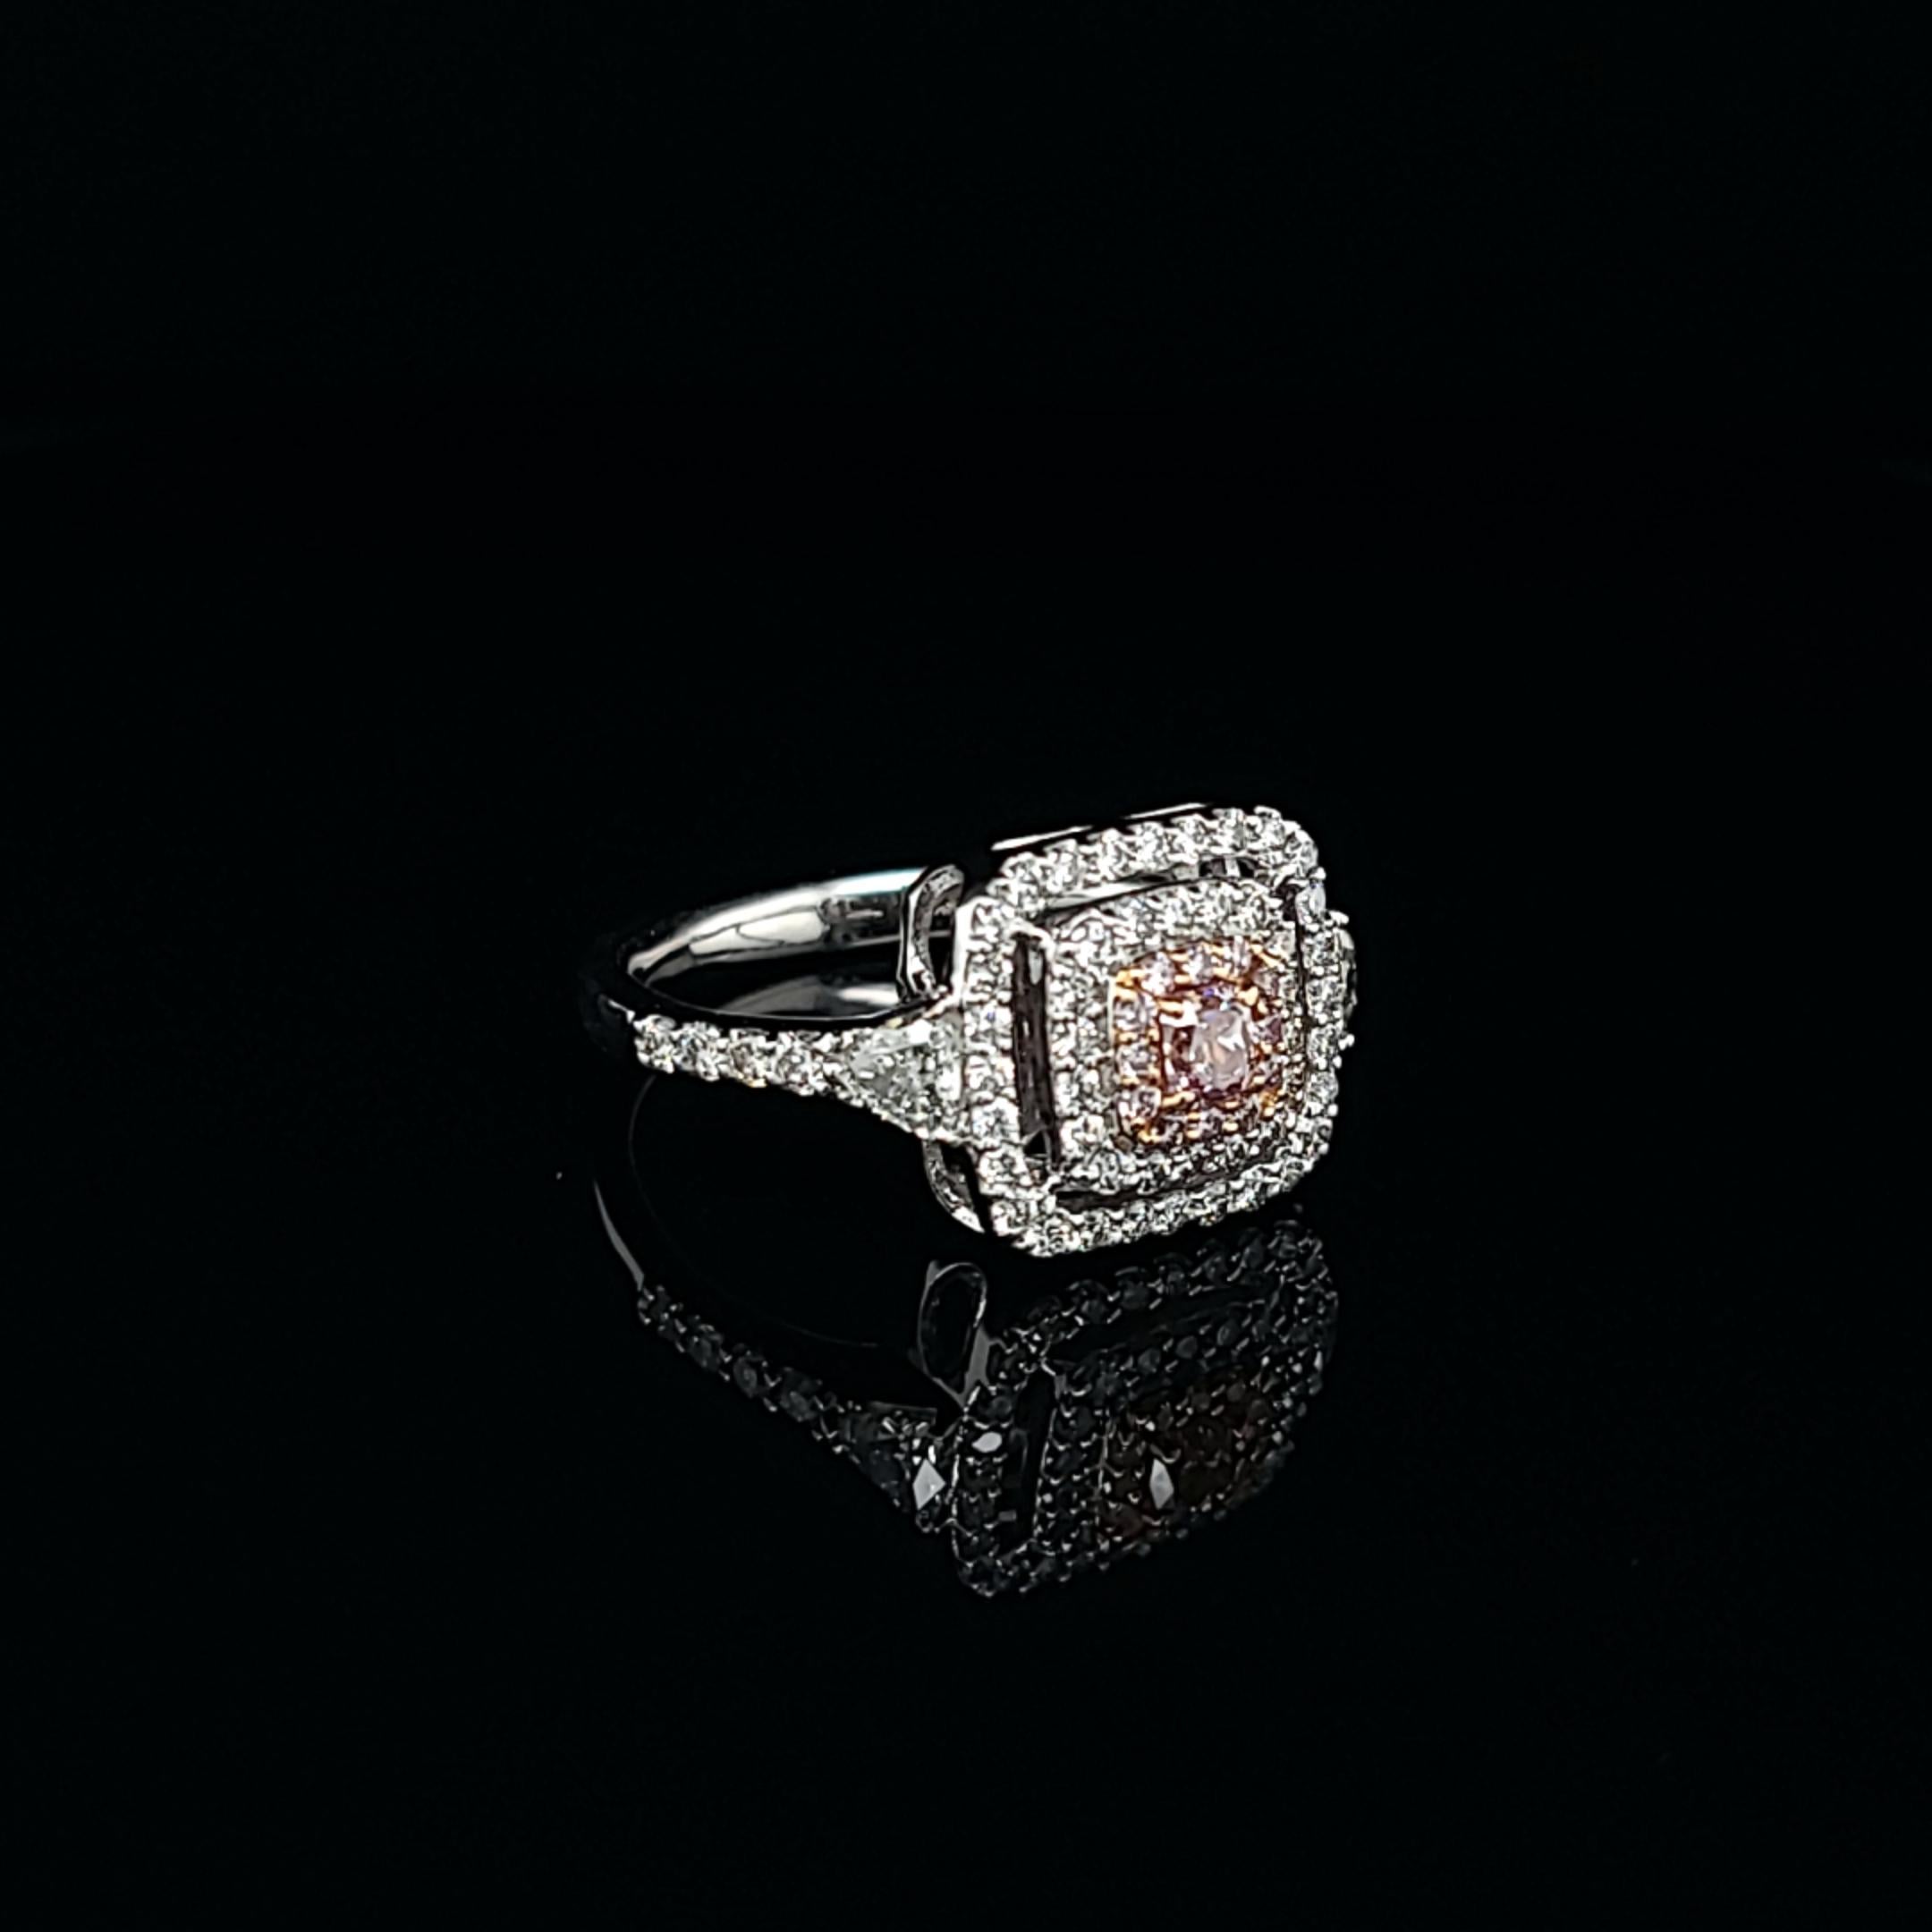 Cushion Cut Pink Diamond Ring Featuring a 0.20-Carat Center Accented by a Stunning Halo For Sale